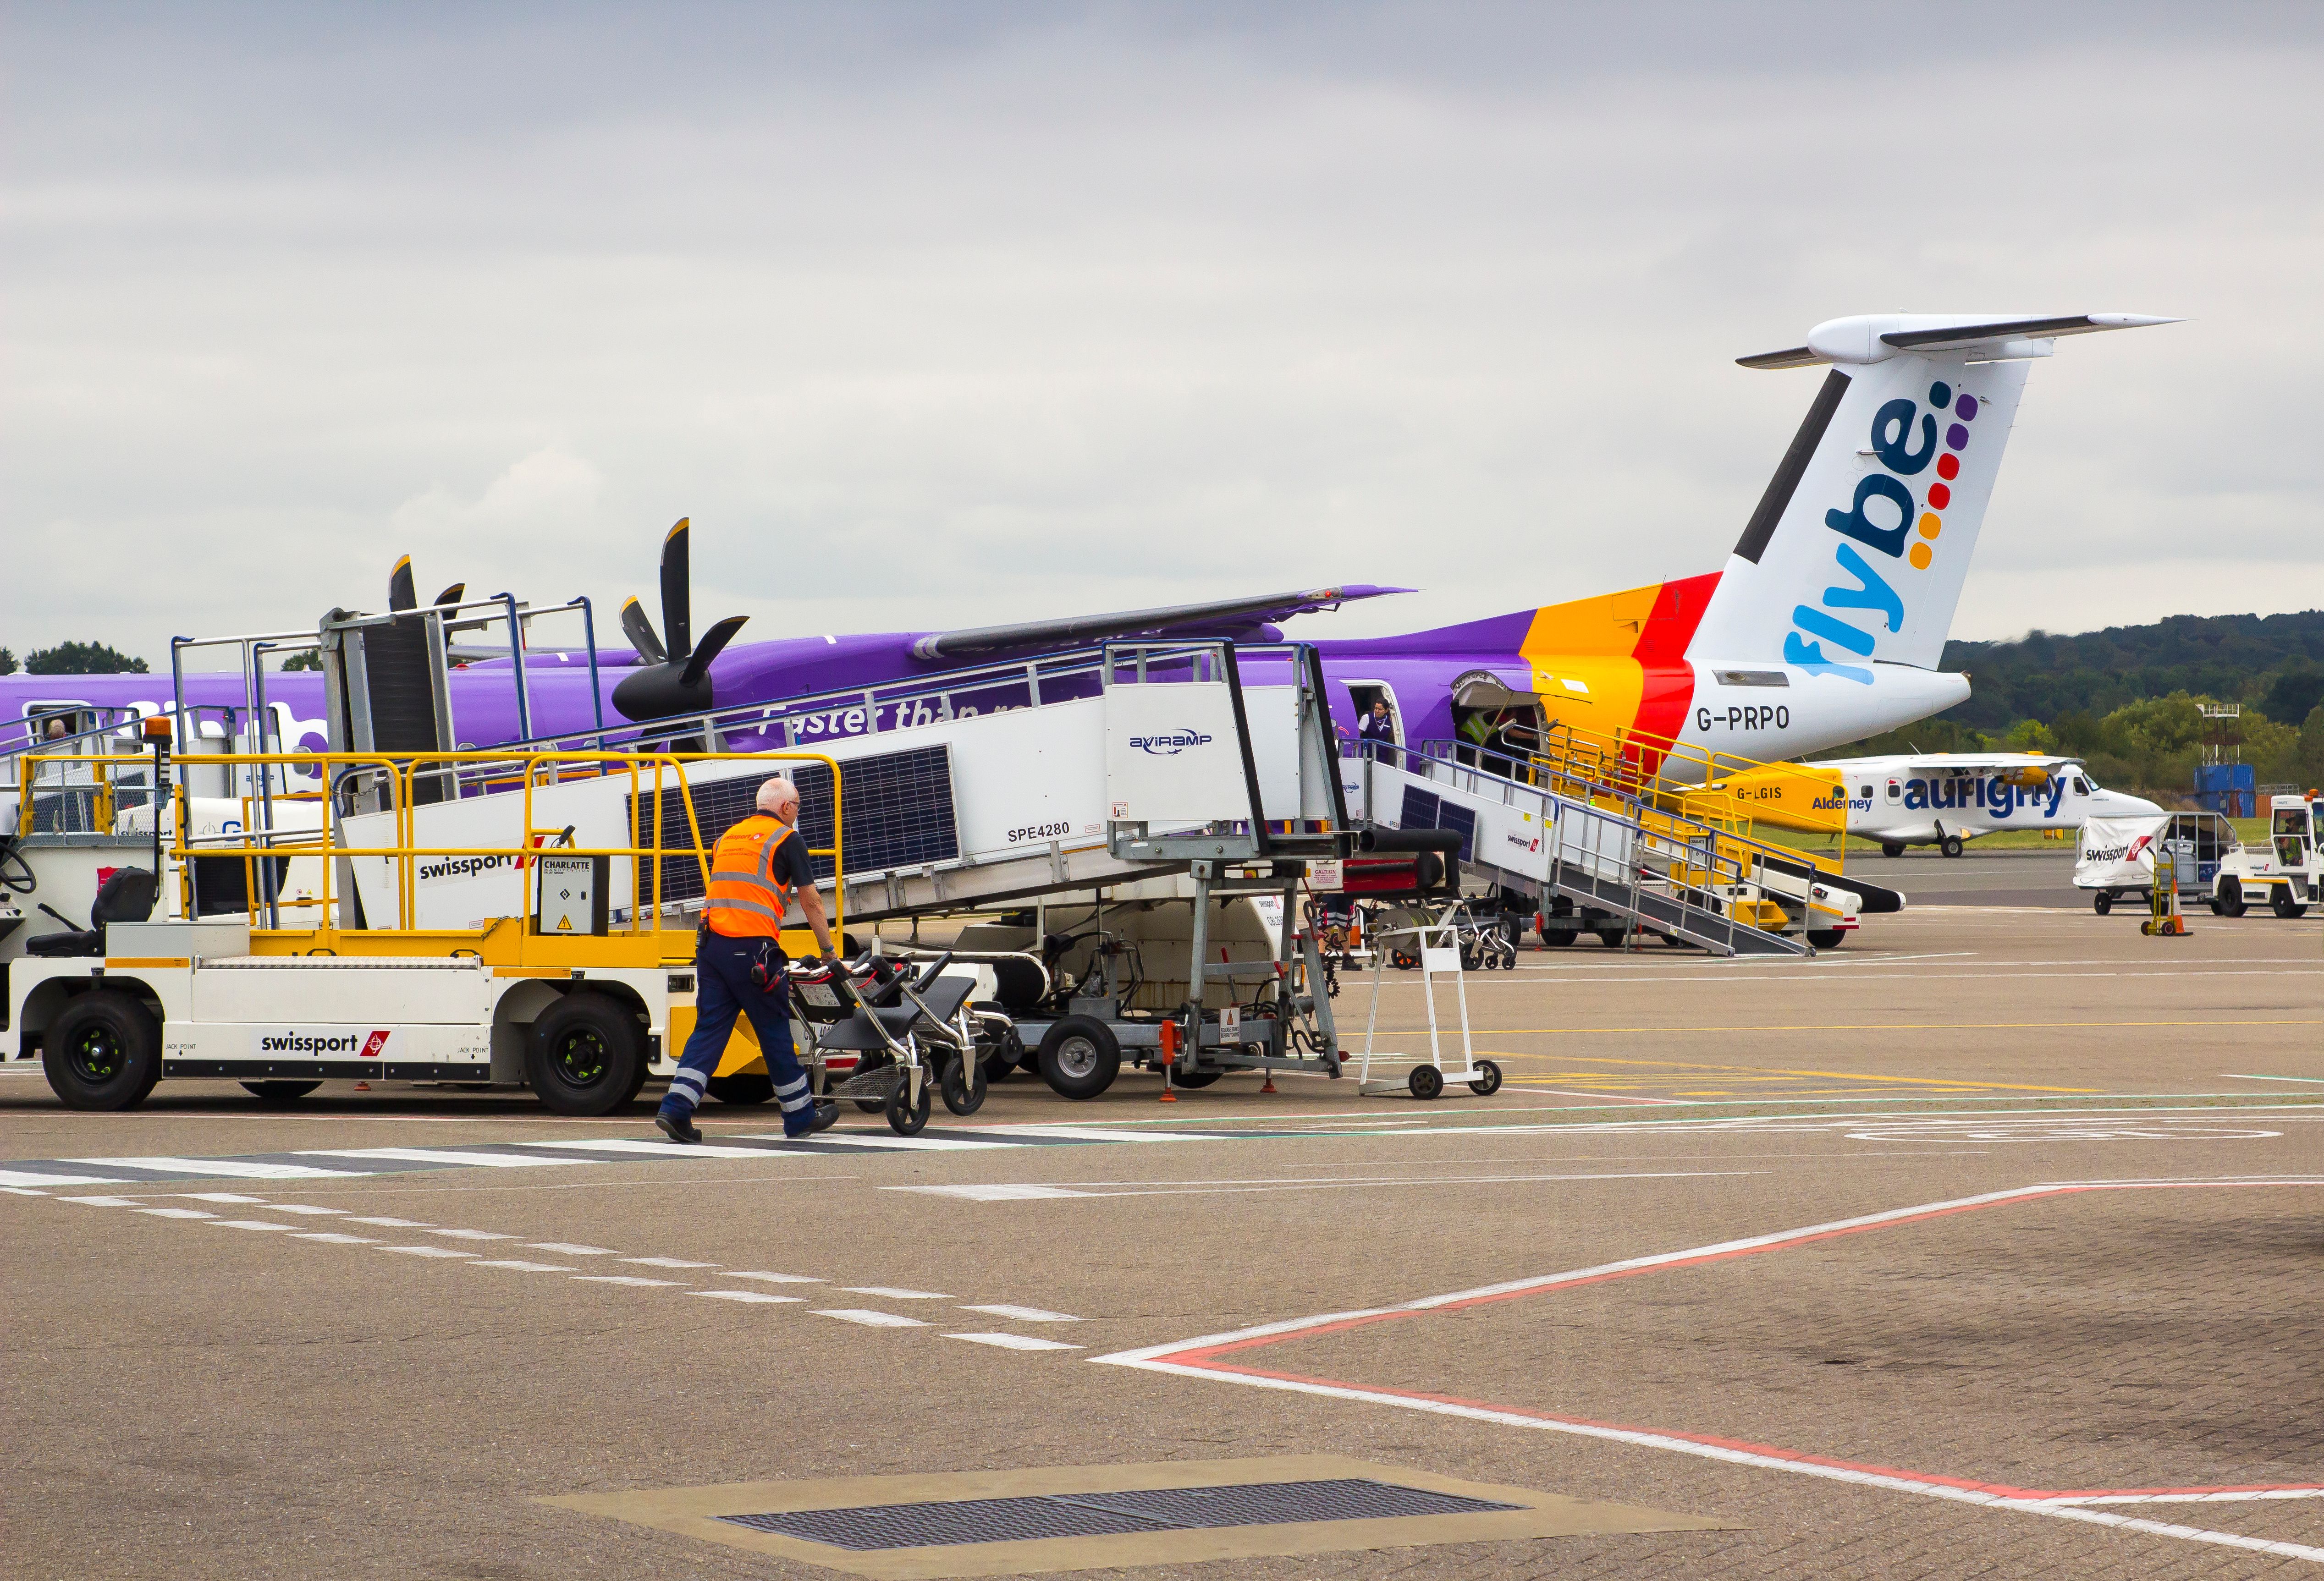 Flybe plane with baggage handler